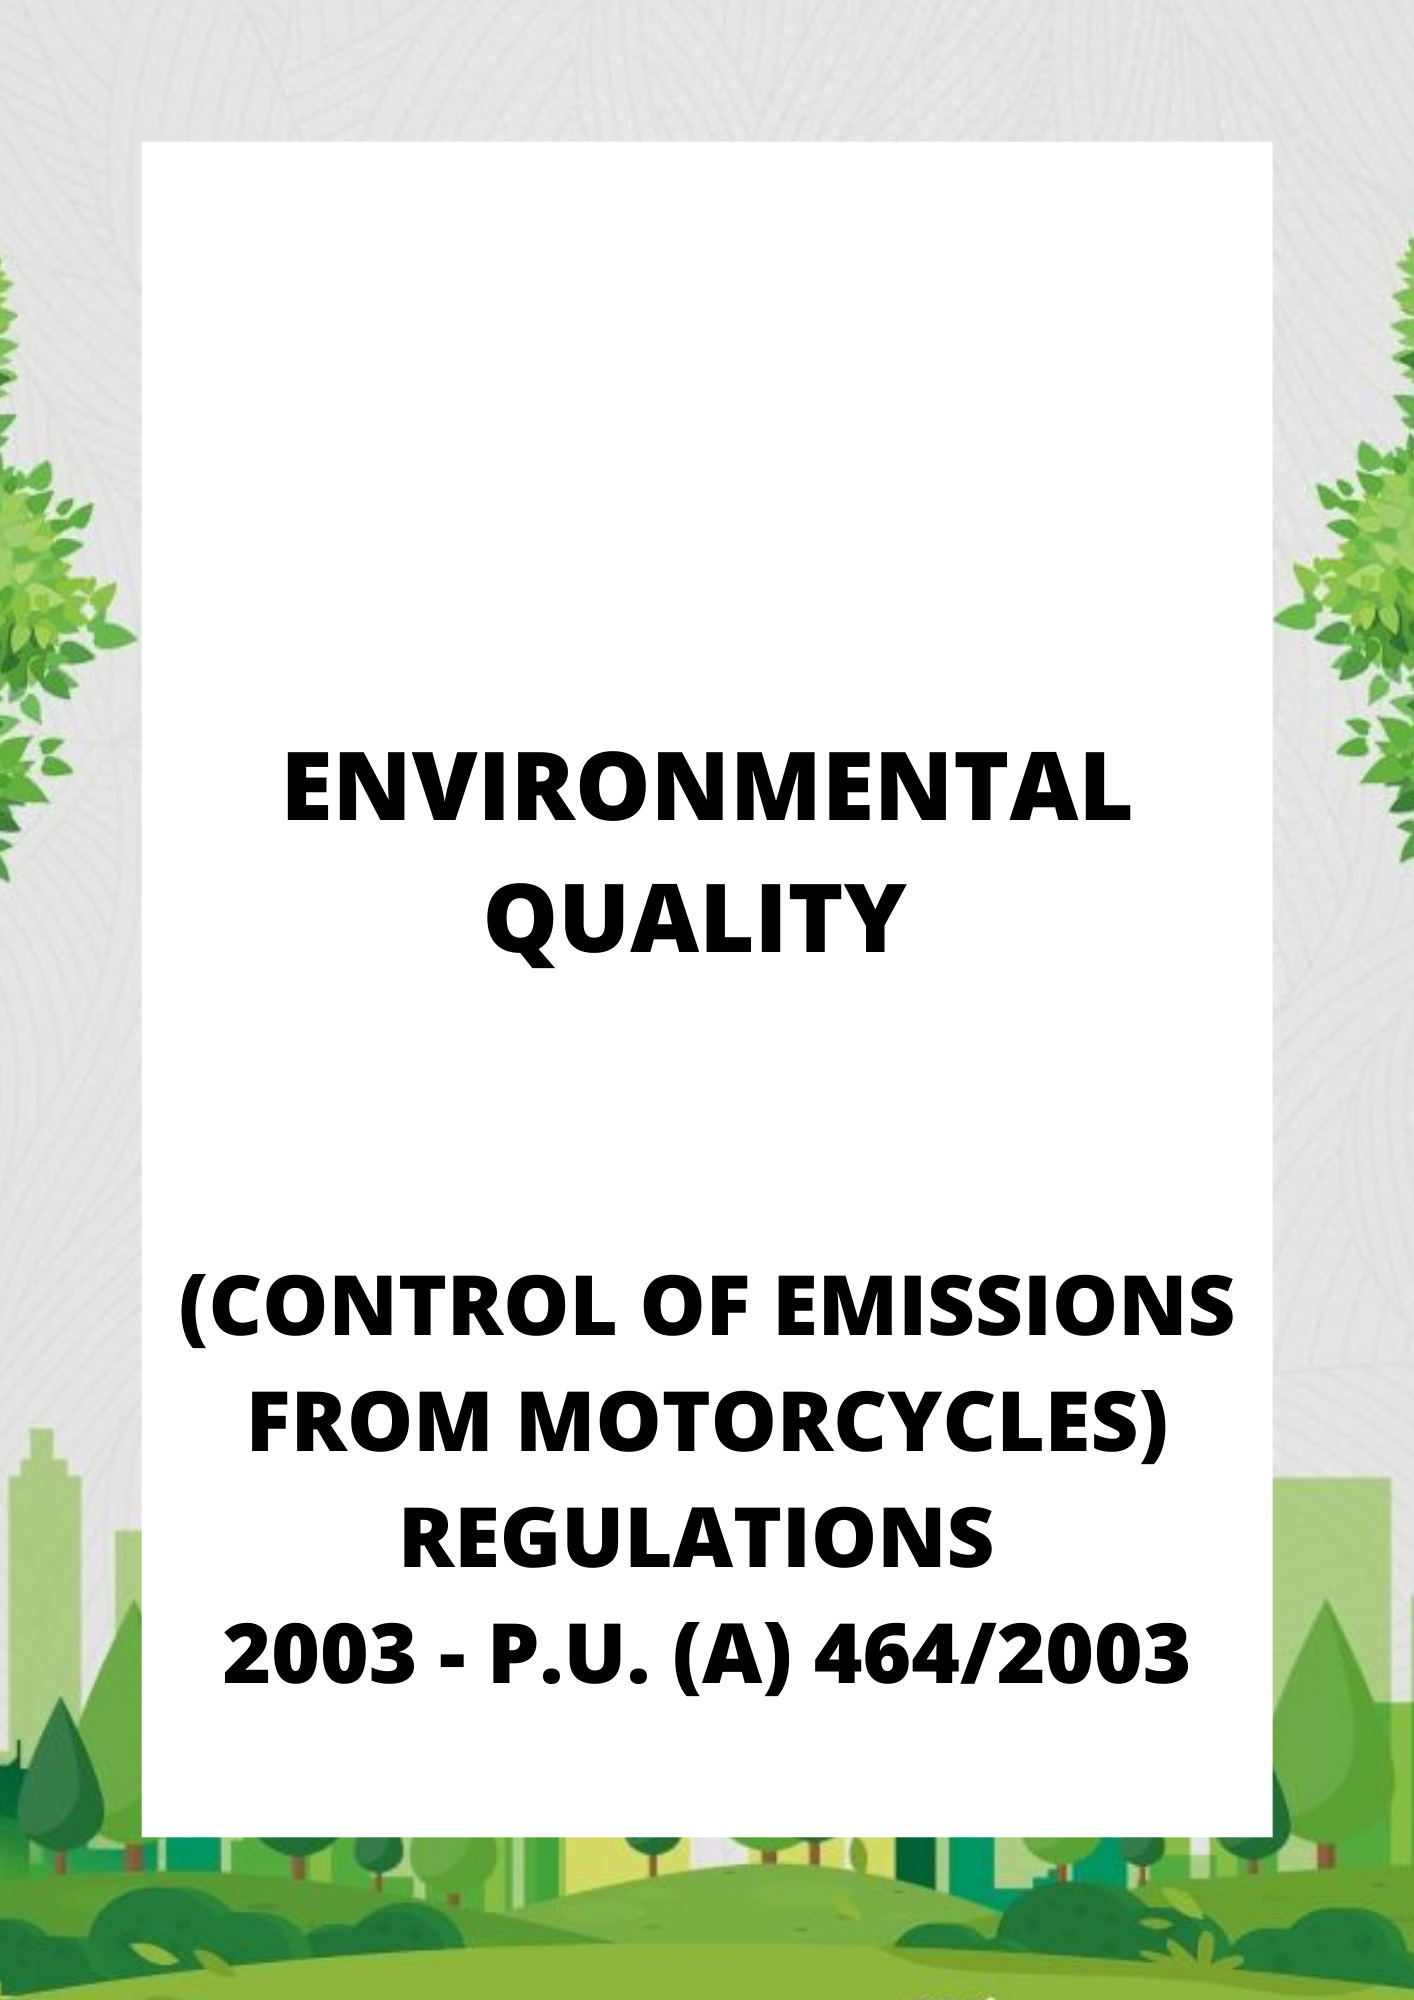 Environmental Quality (Control of Emissions from Motorcycles) Regulations 2003 - P.U. (A) 4642003